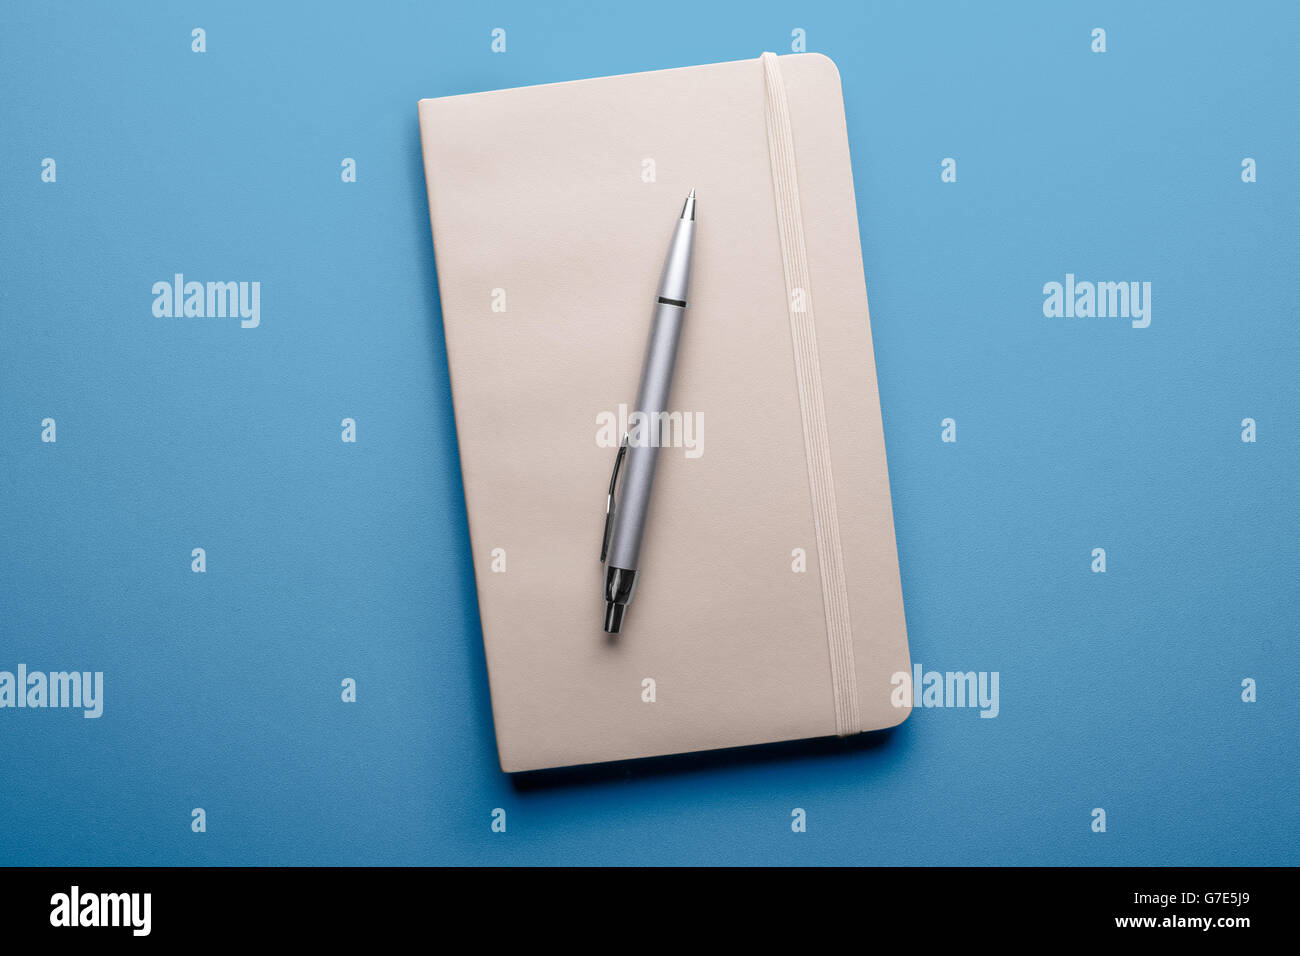 top view of blank notebook with pen on blue background Stock Photo